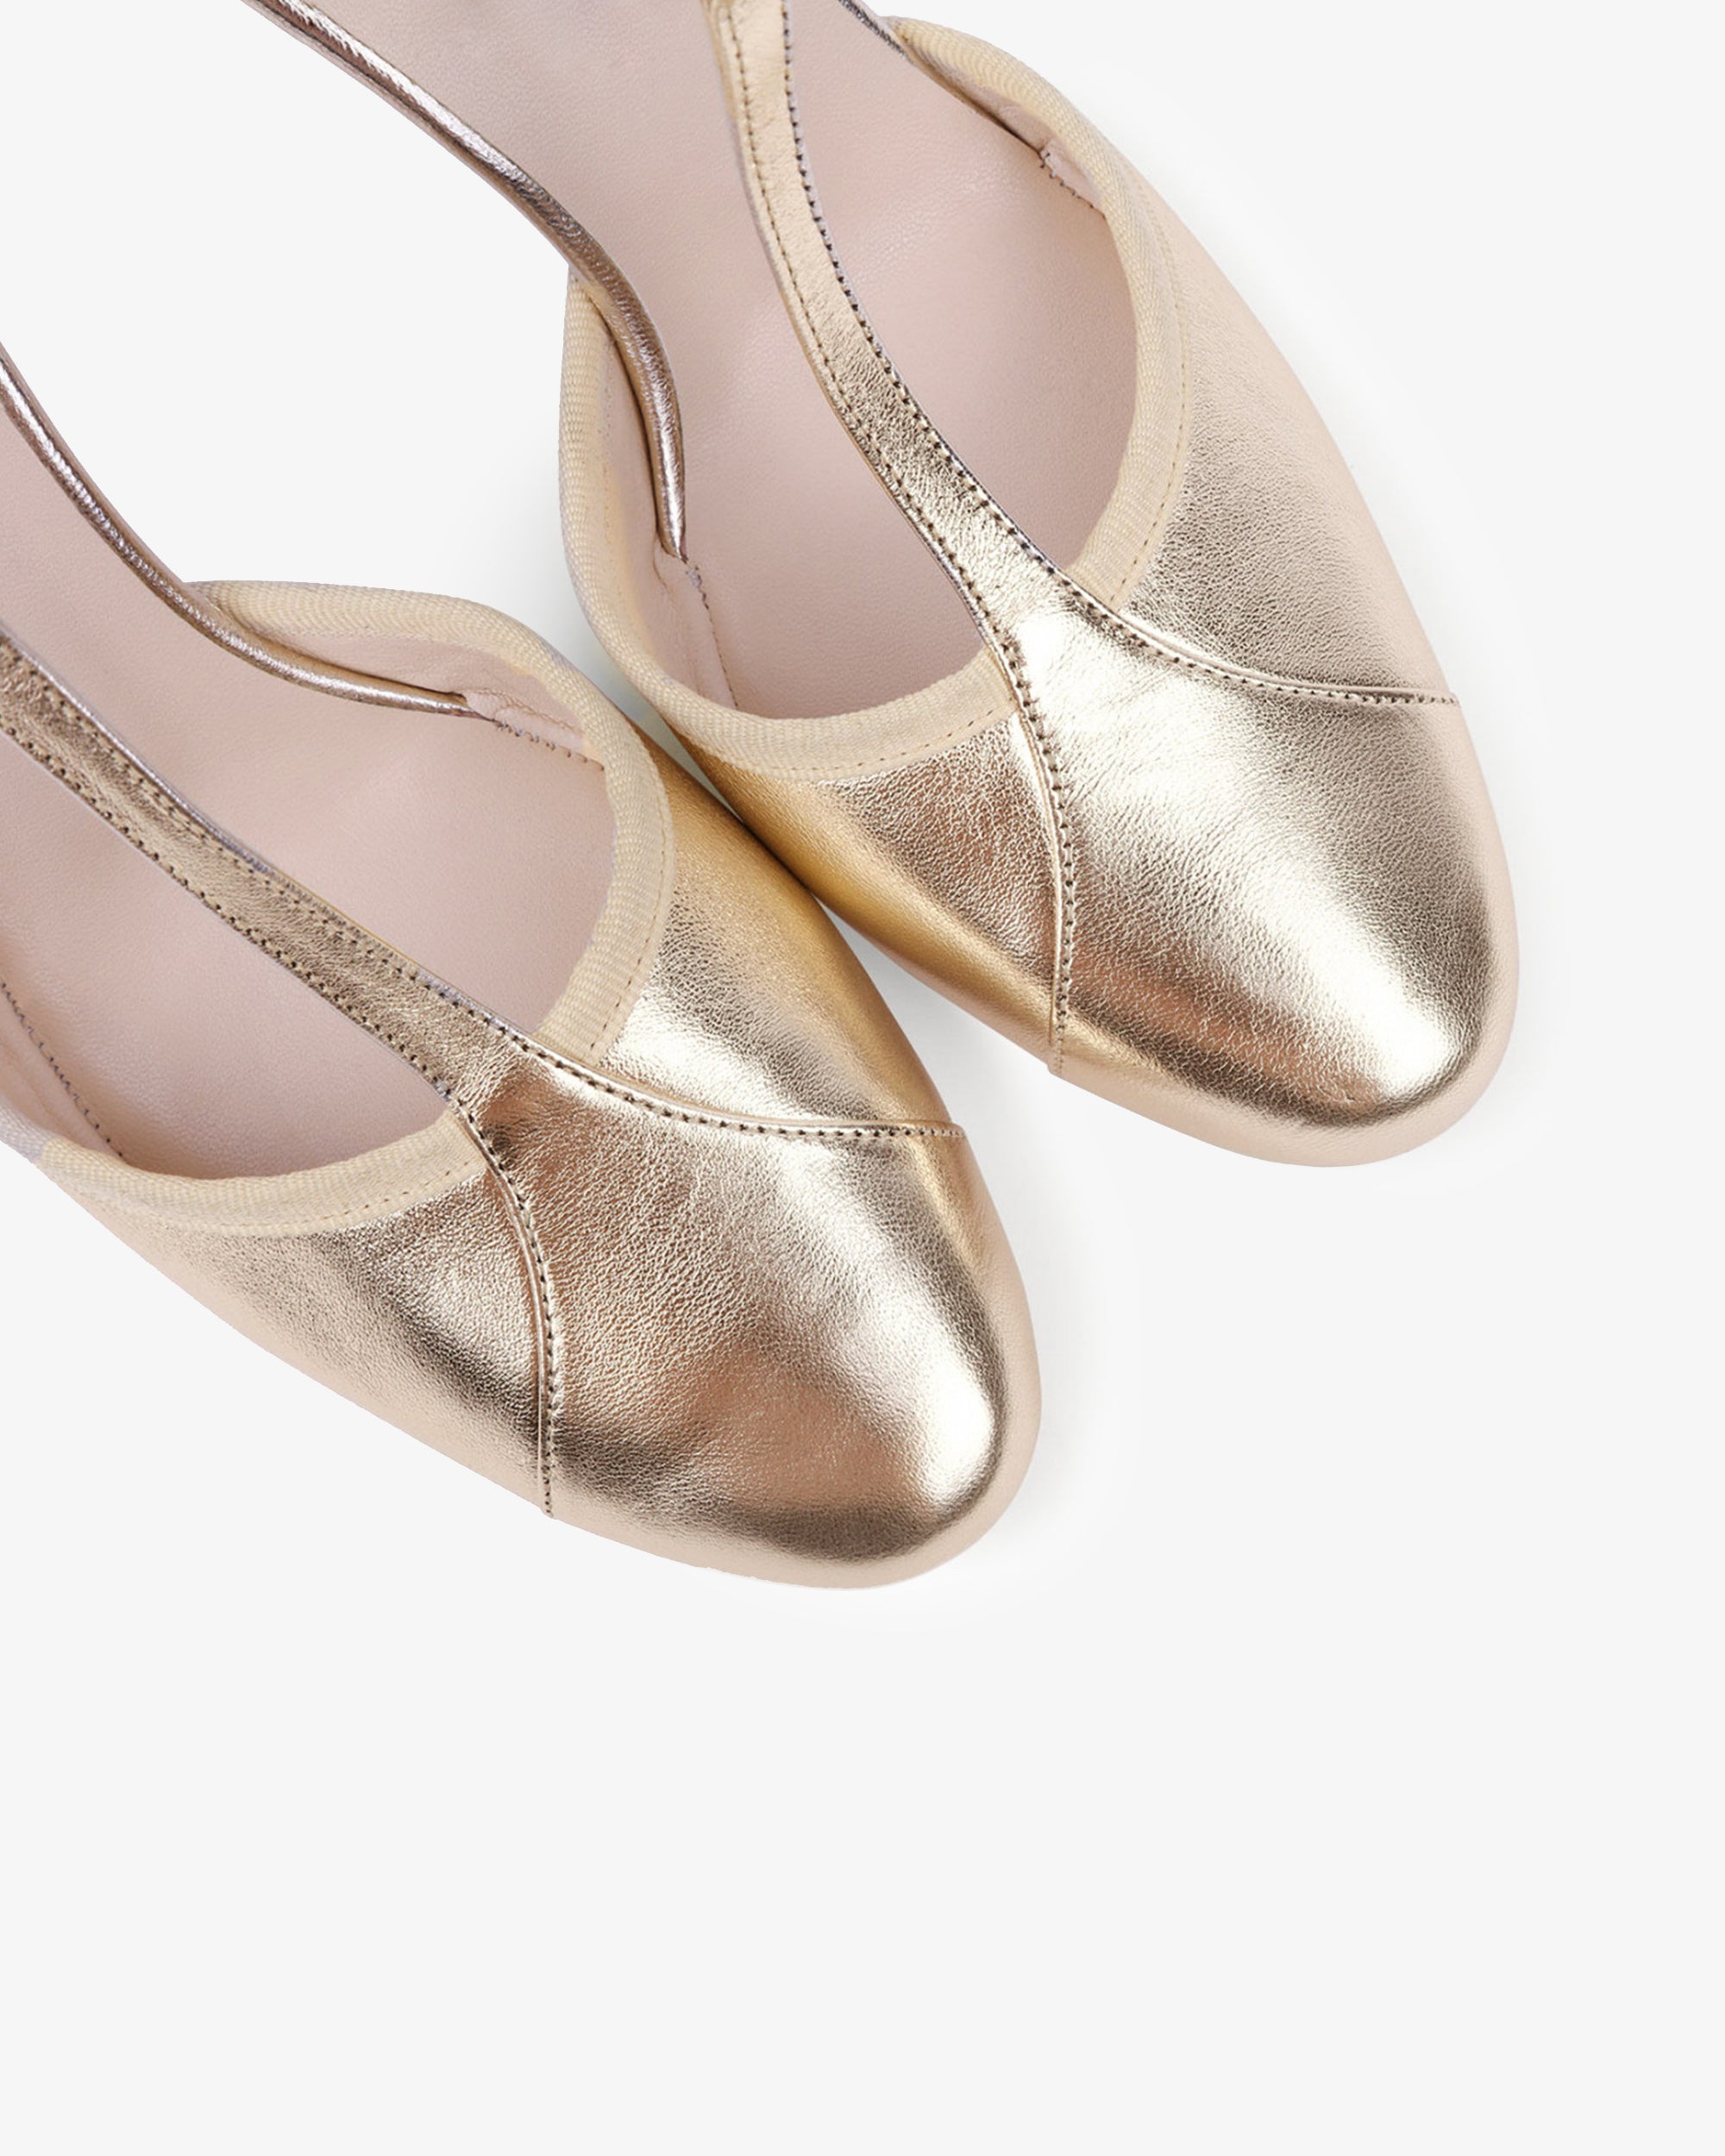 Repetto Paris | Terry pumps | Color Light gold and Silver